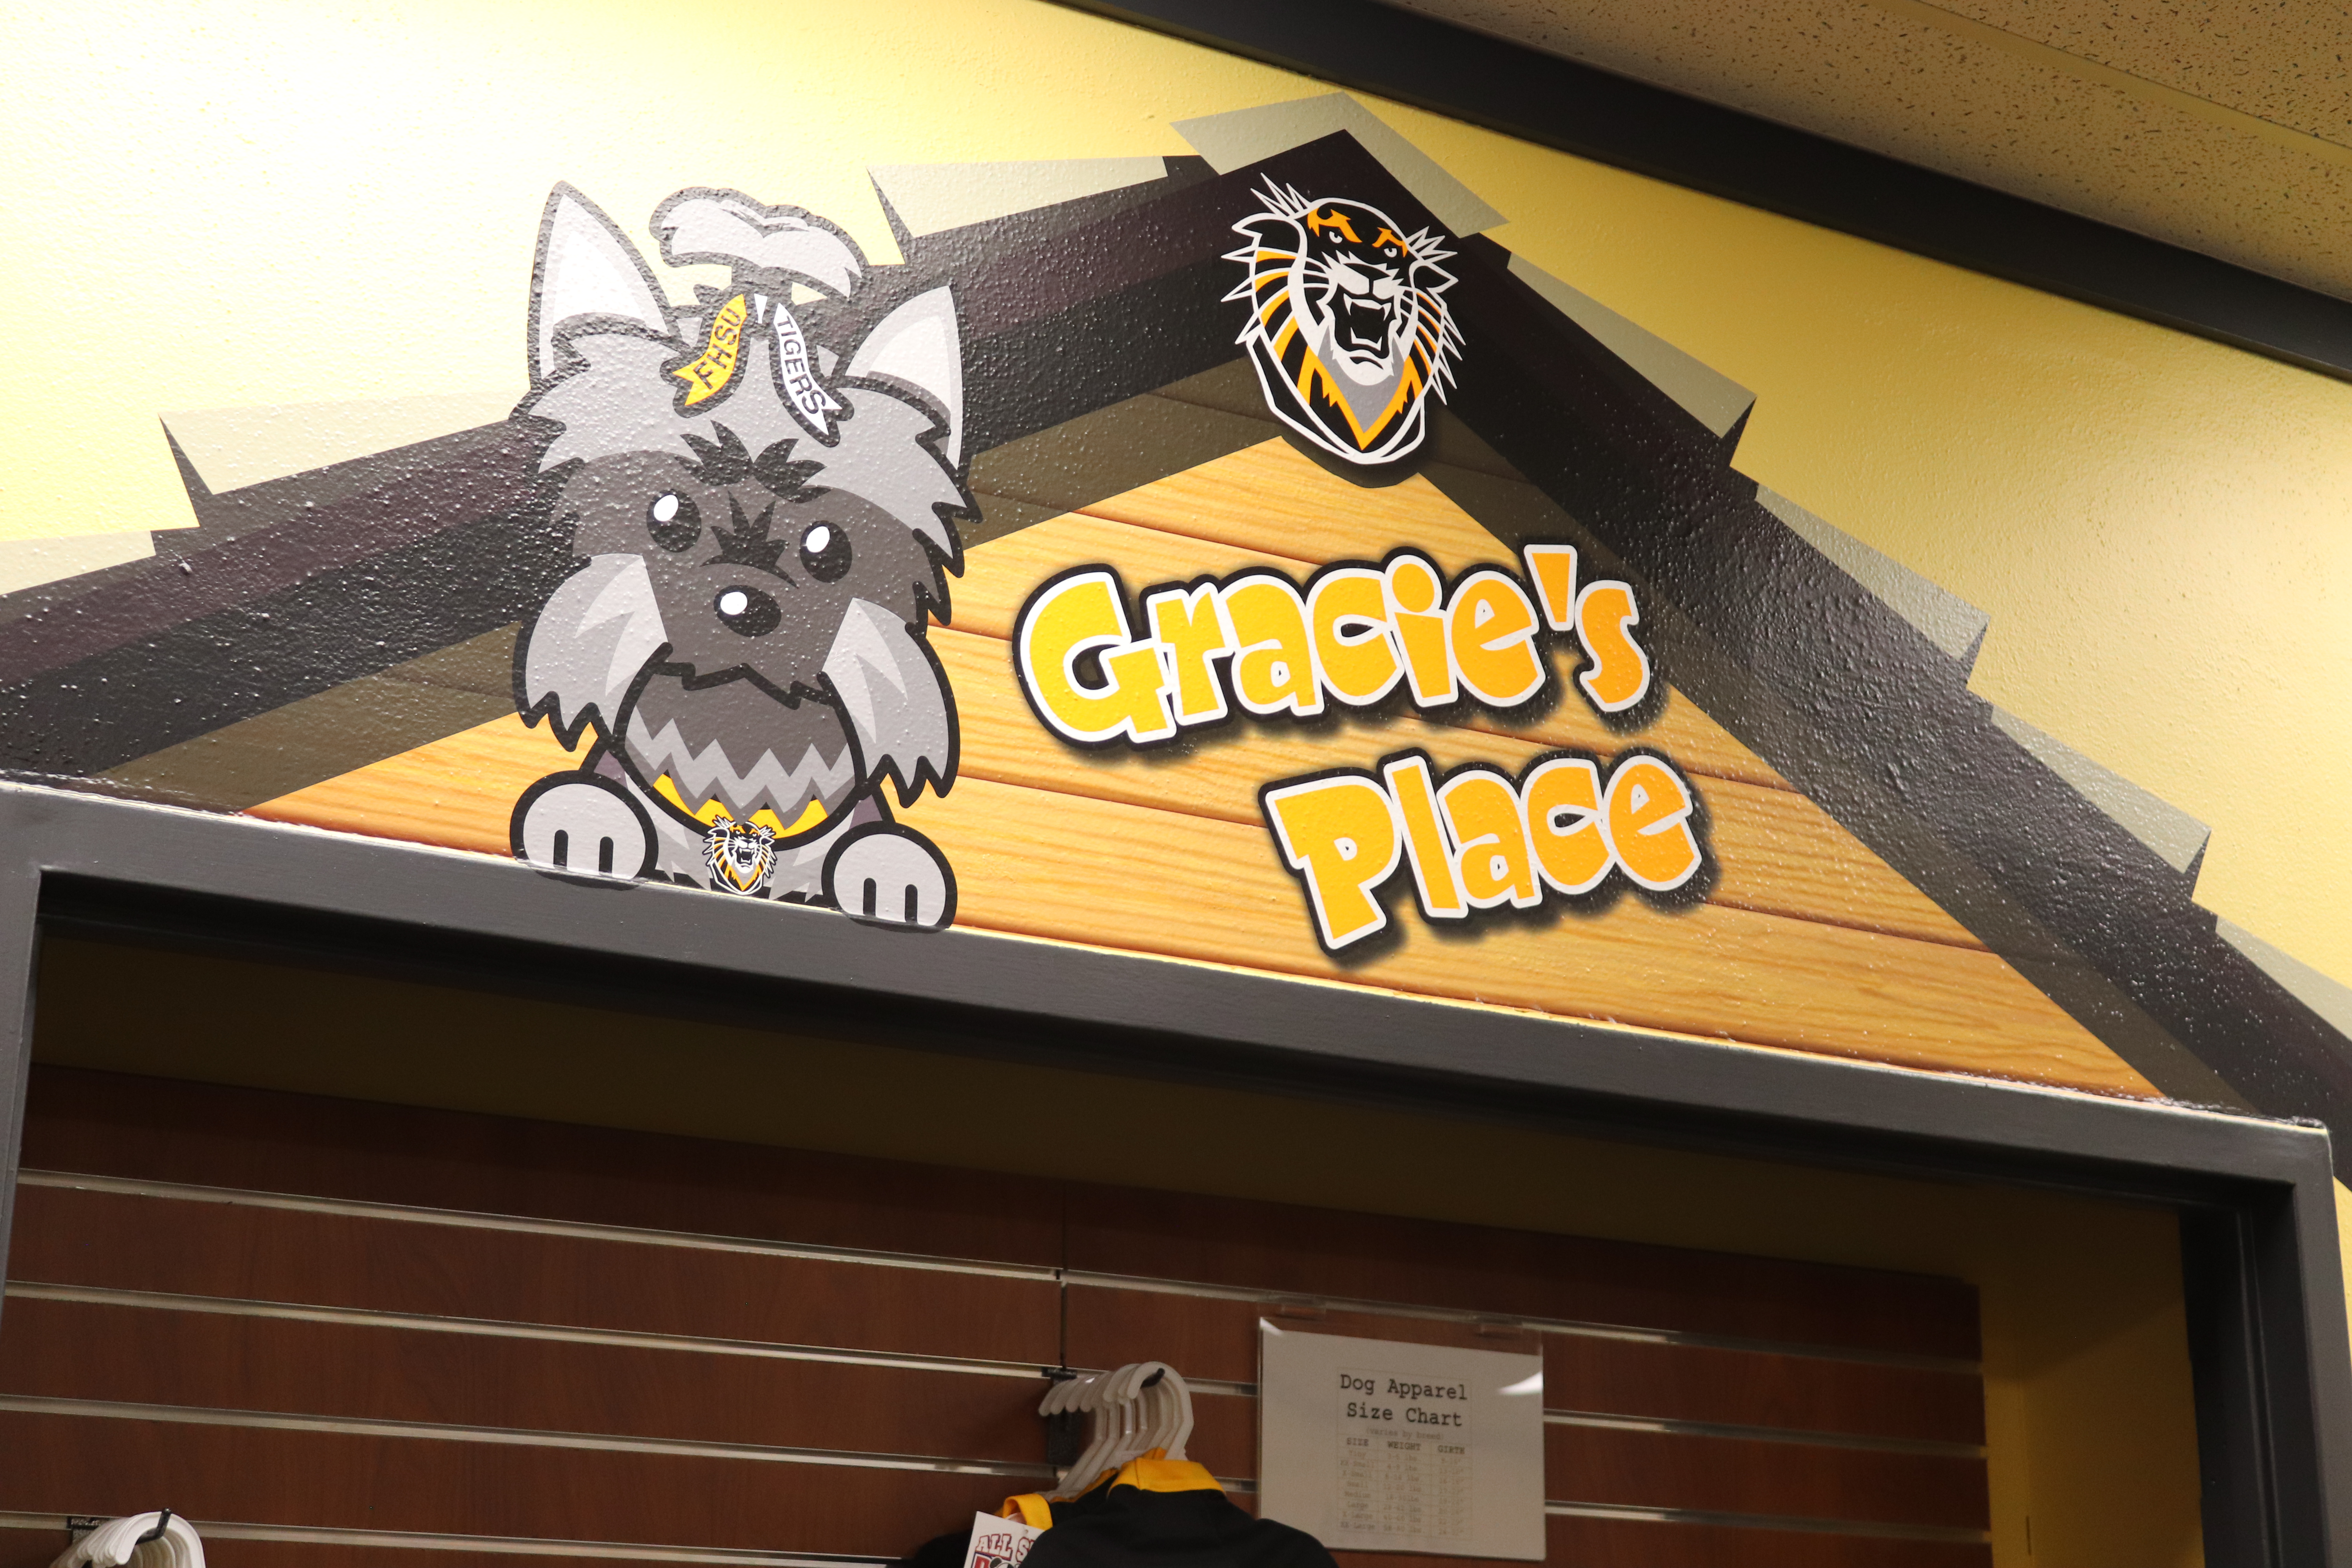 All Star Dogs: Fort Hays State University Pet apparel and accessories